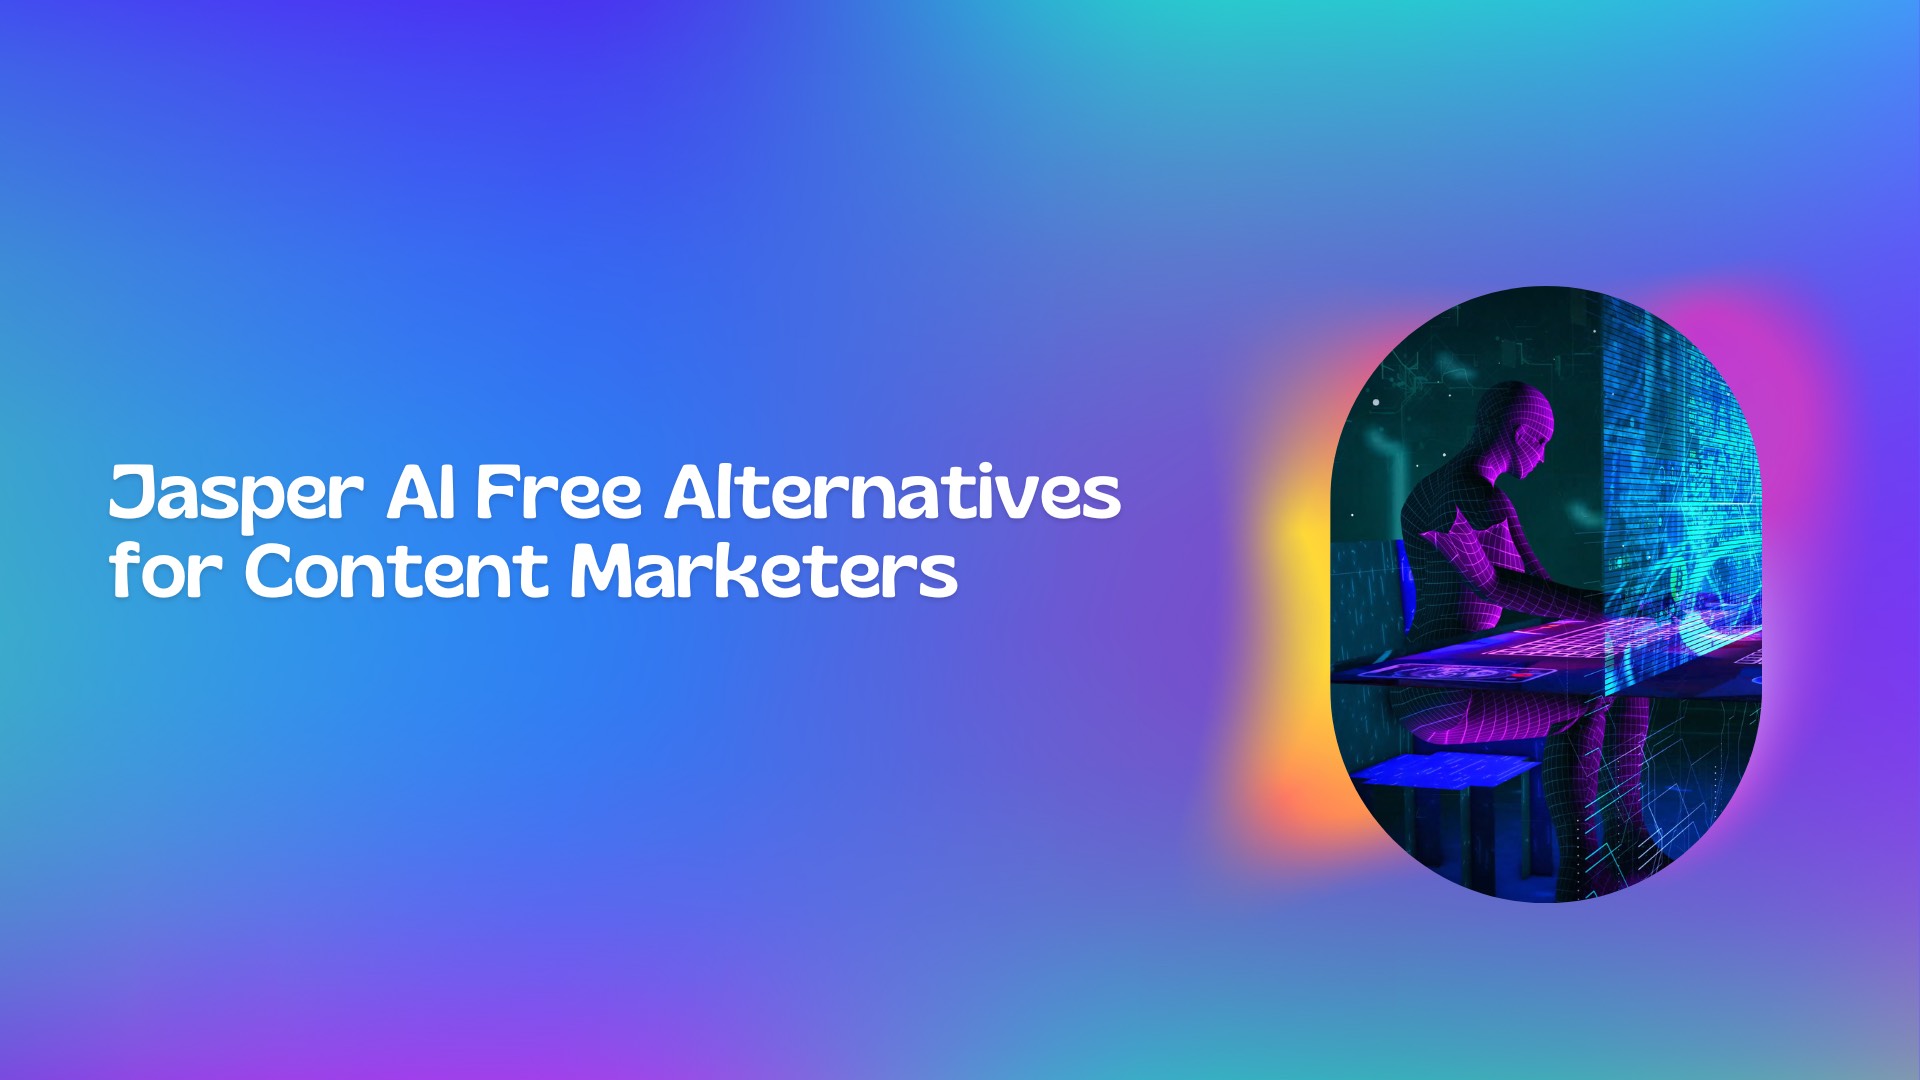 Jasper AI Free Alternatives for Content Marketers in 2023